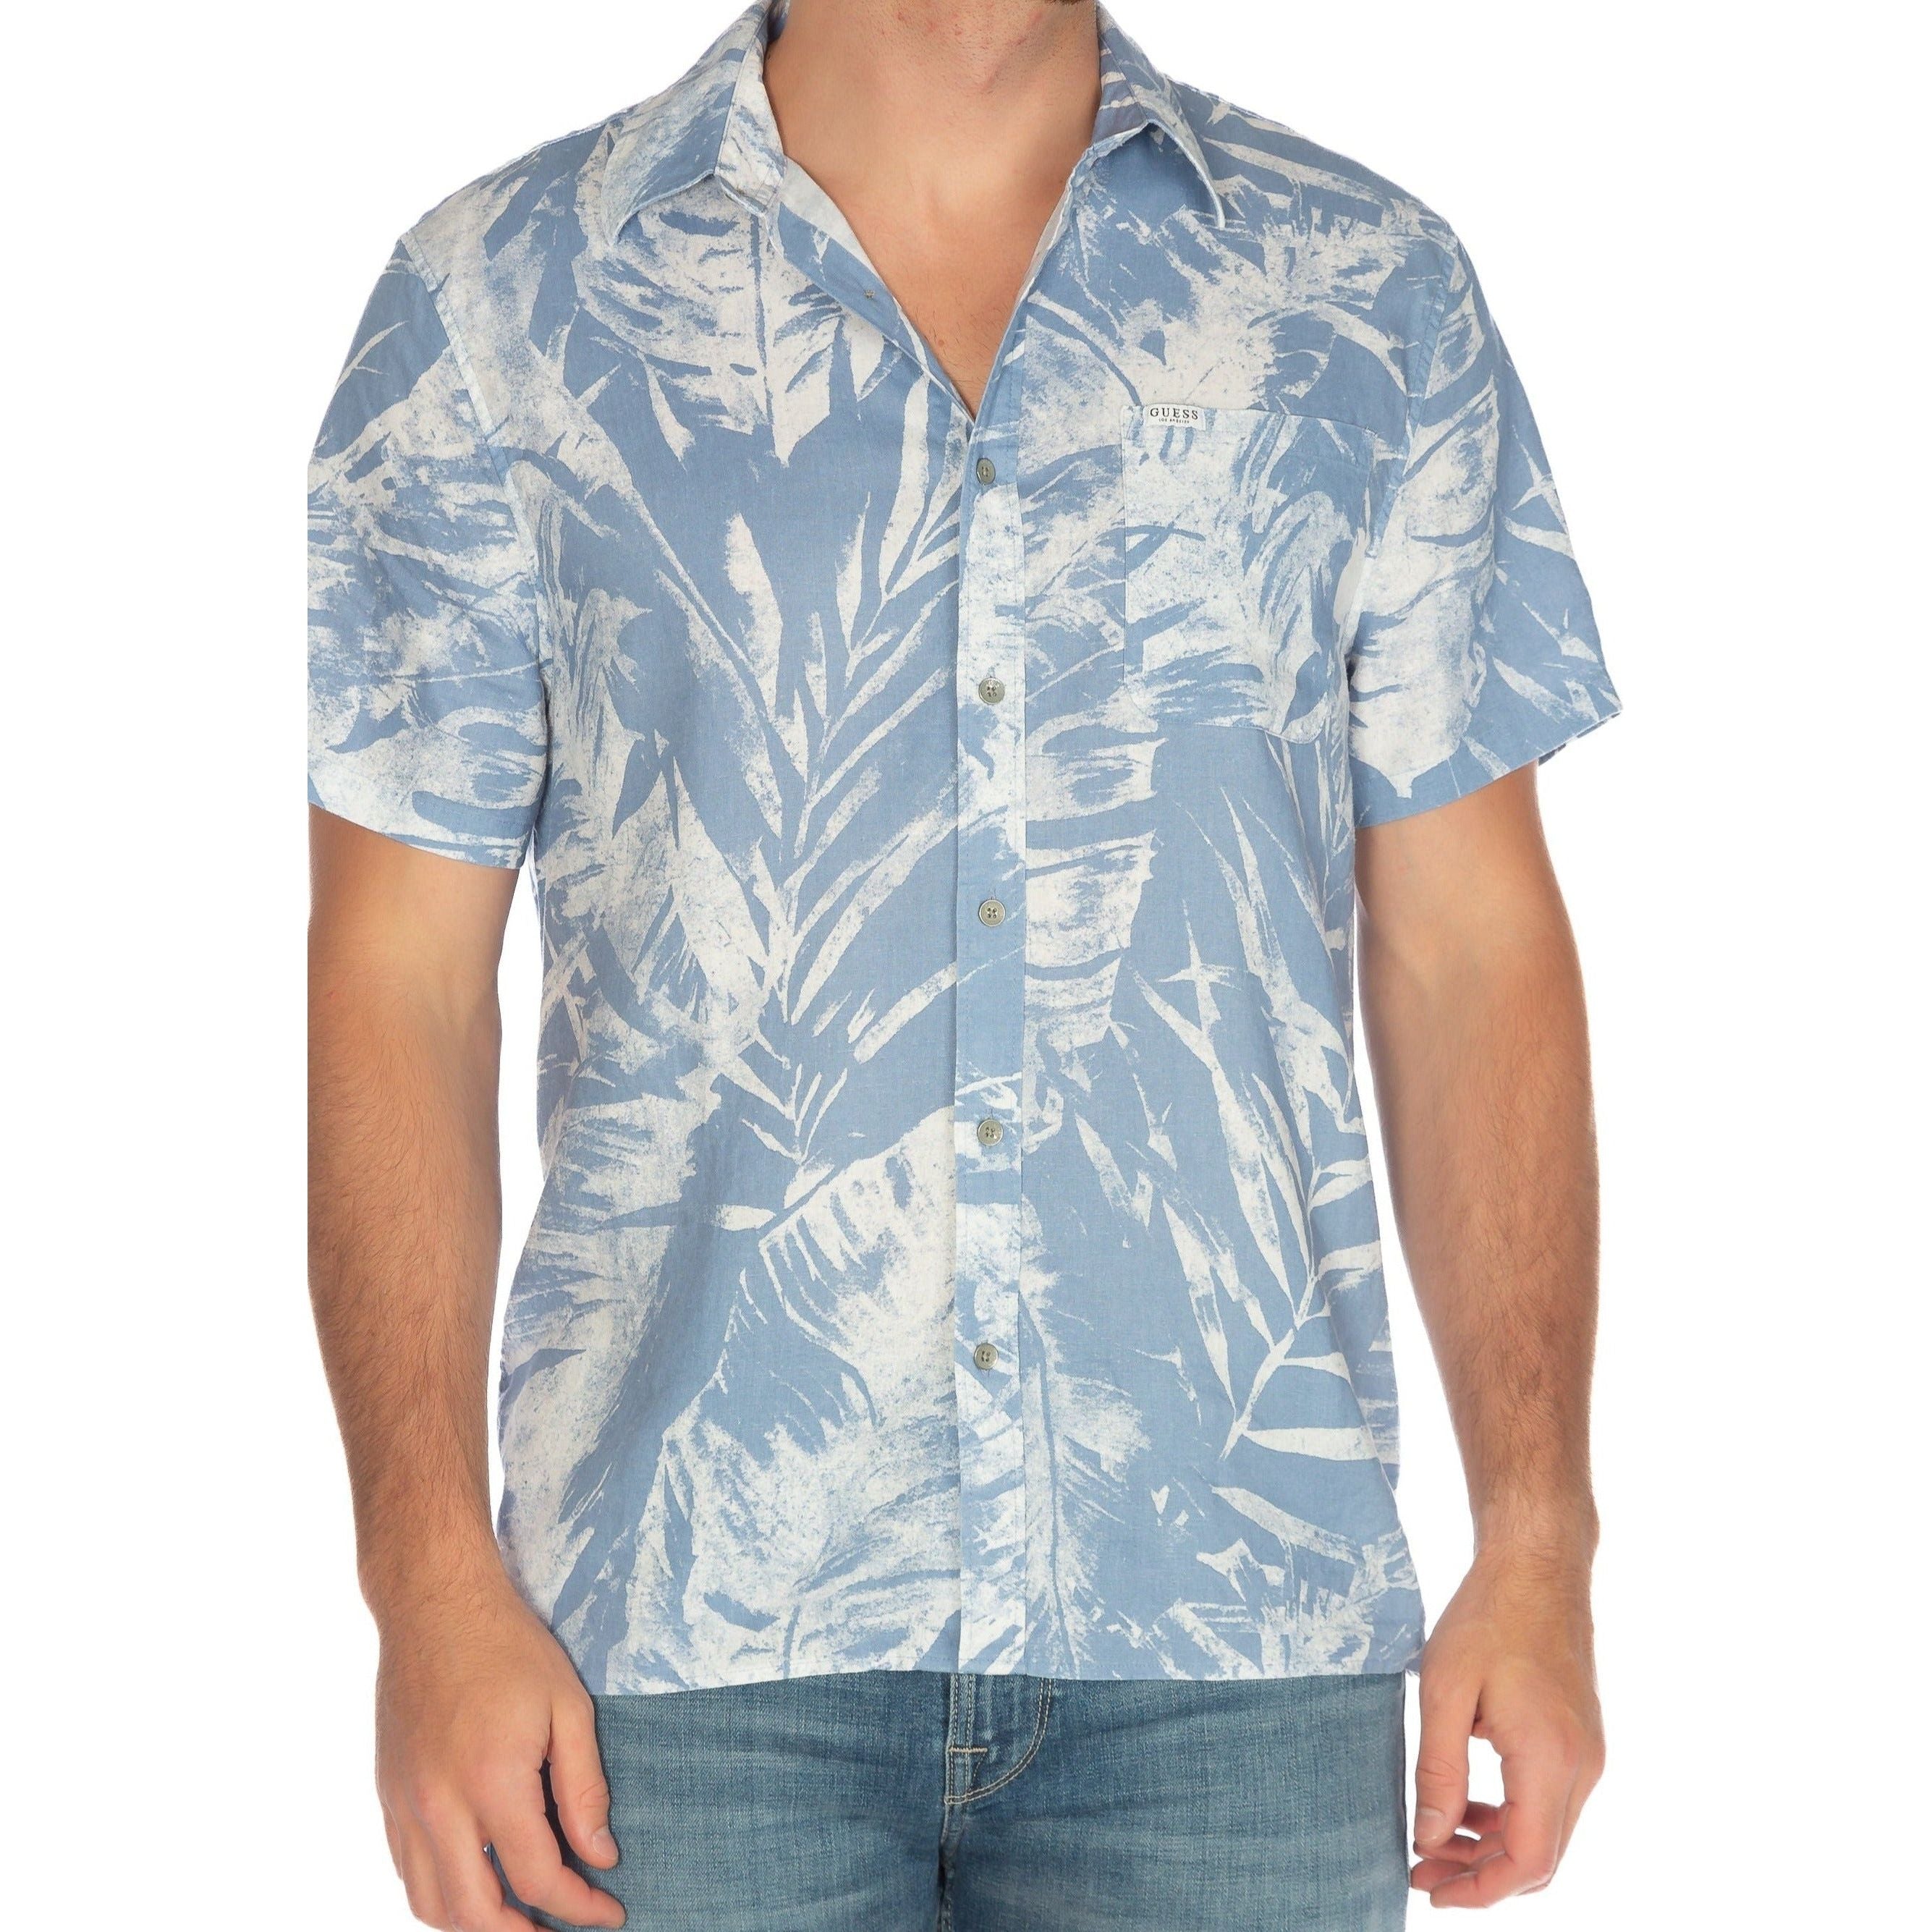 Guess - Collin Inside Printed Shirt in Cloudy White Leaf Print